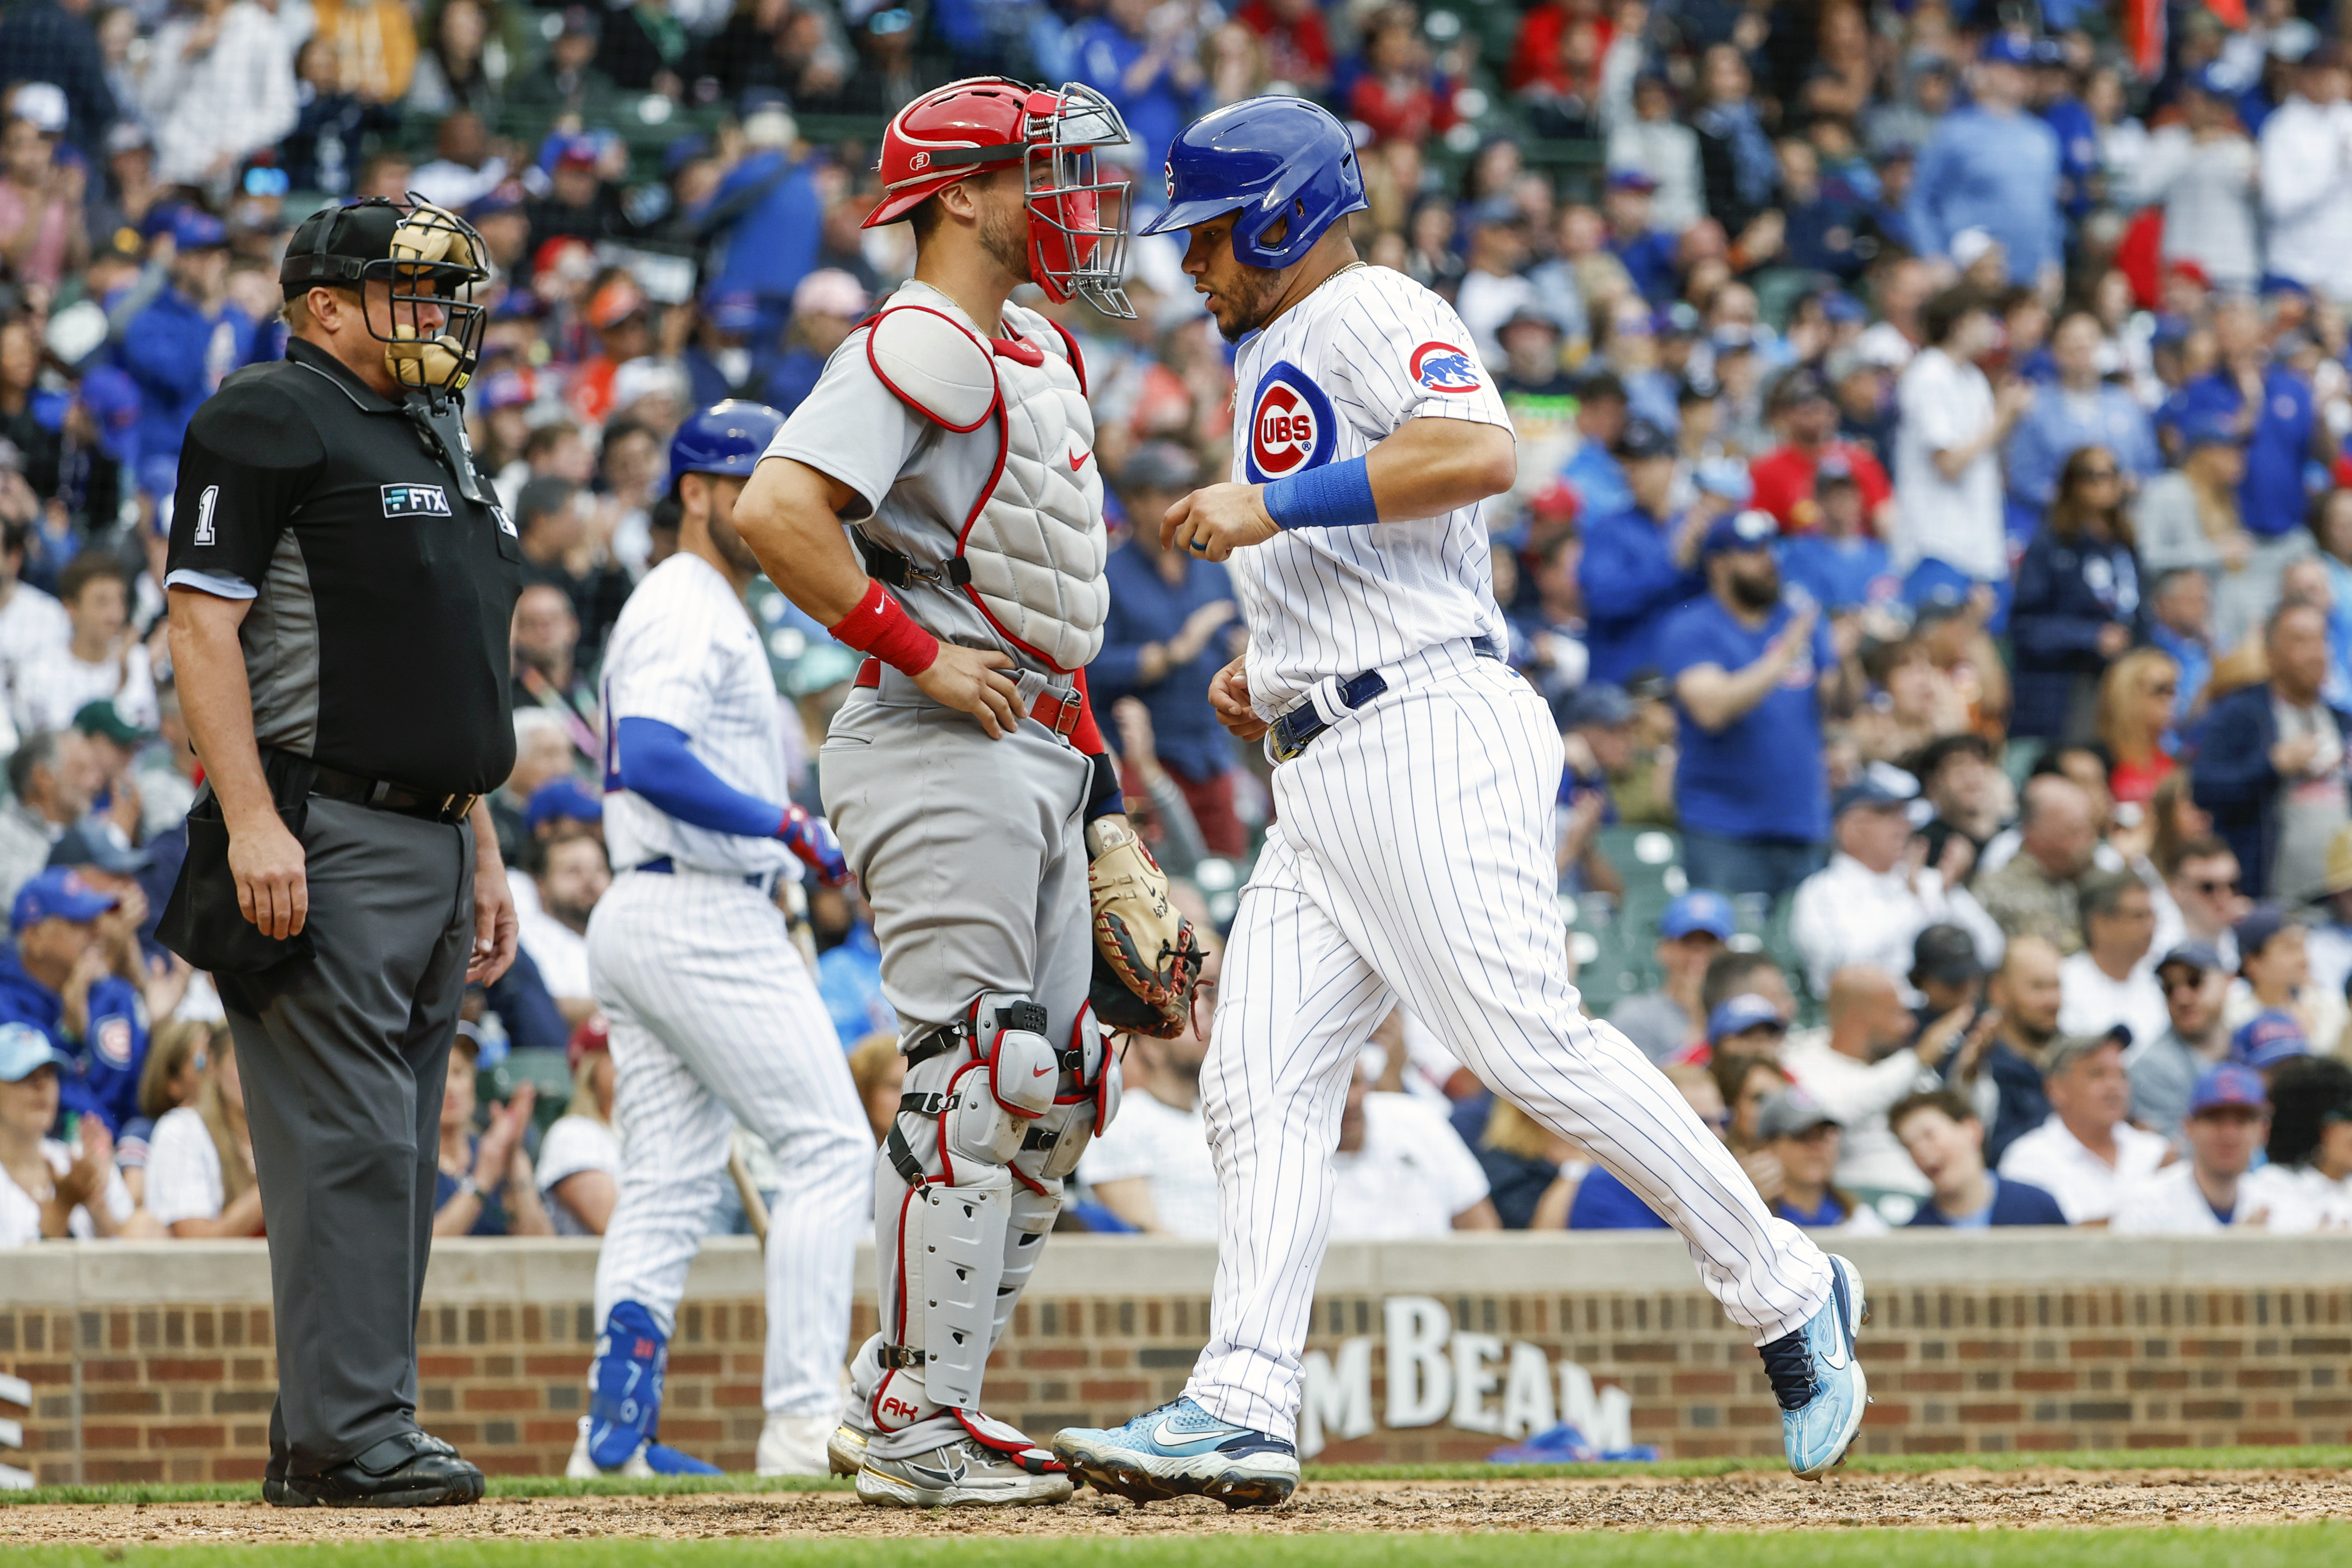 Willson Contreras injury update: Cardinals catcher lands on IL, ending  first season of five-year contract 